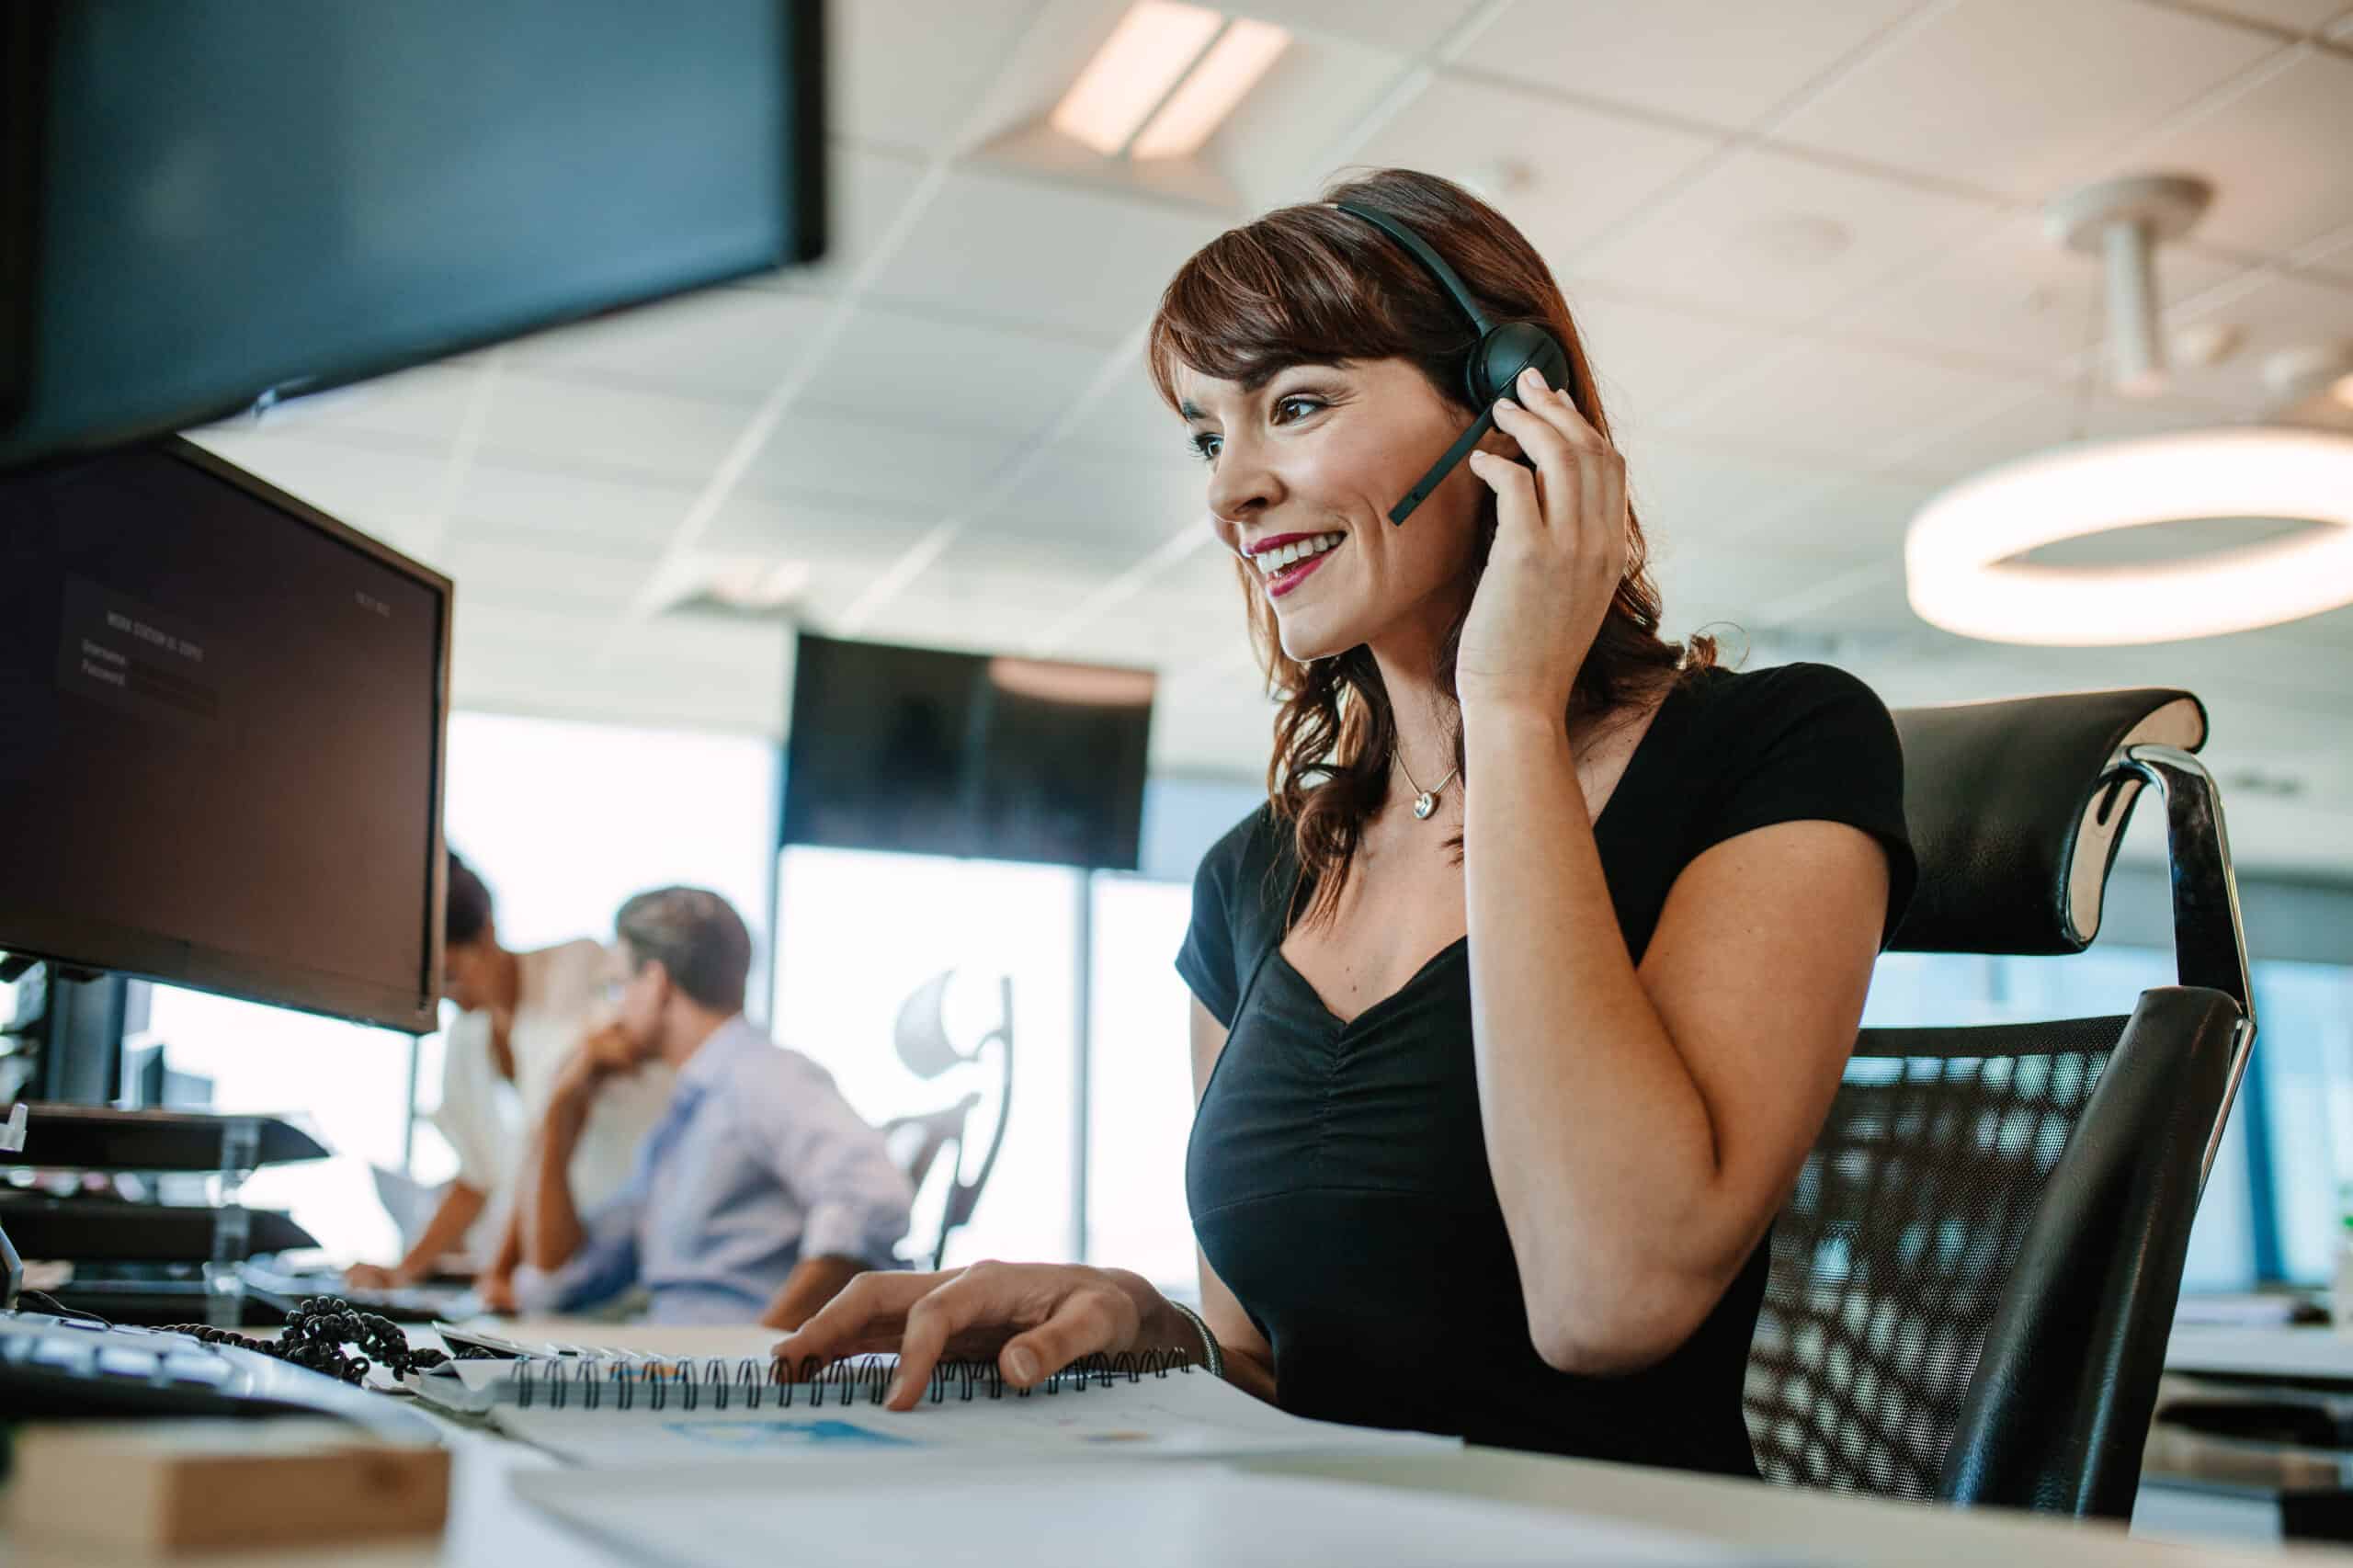 Woman smiles answering the phone on a headset in a call center setting|||